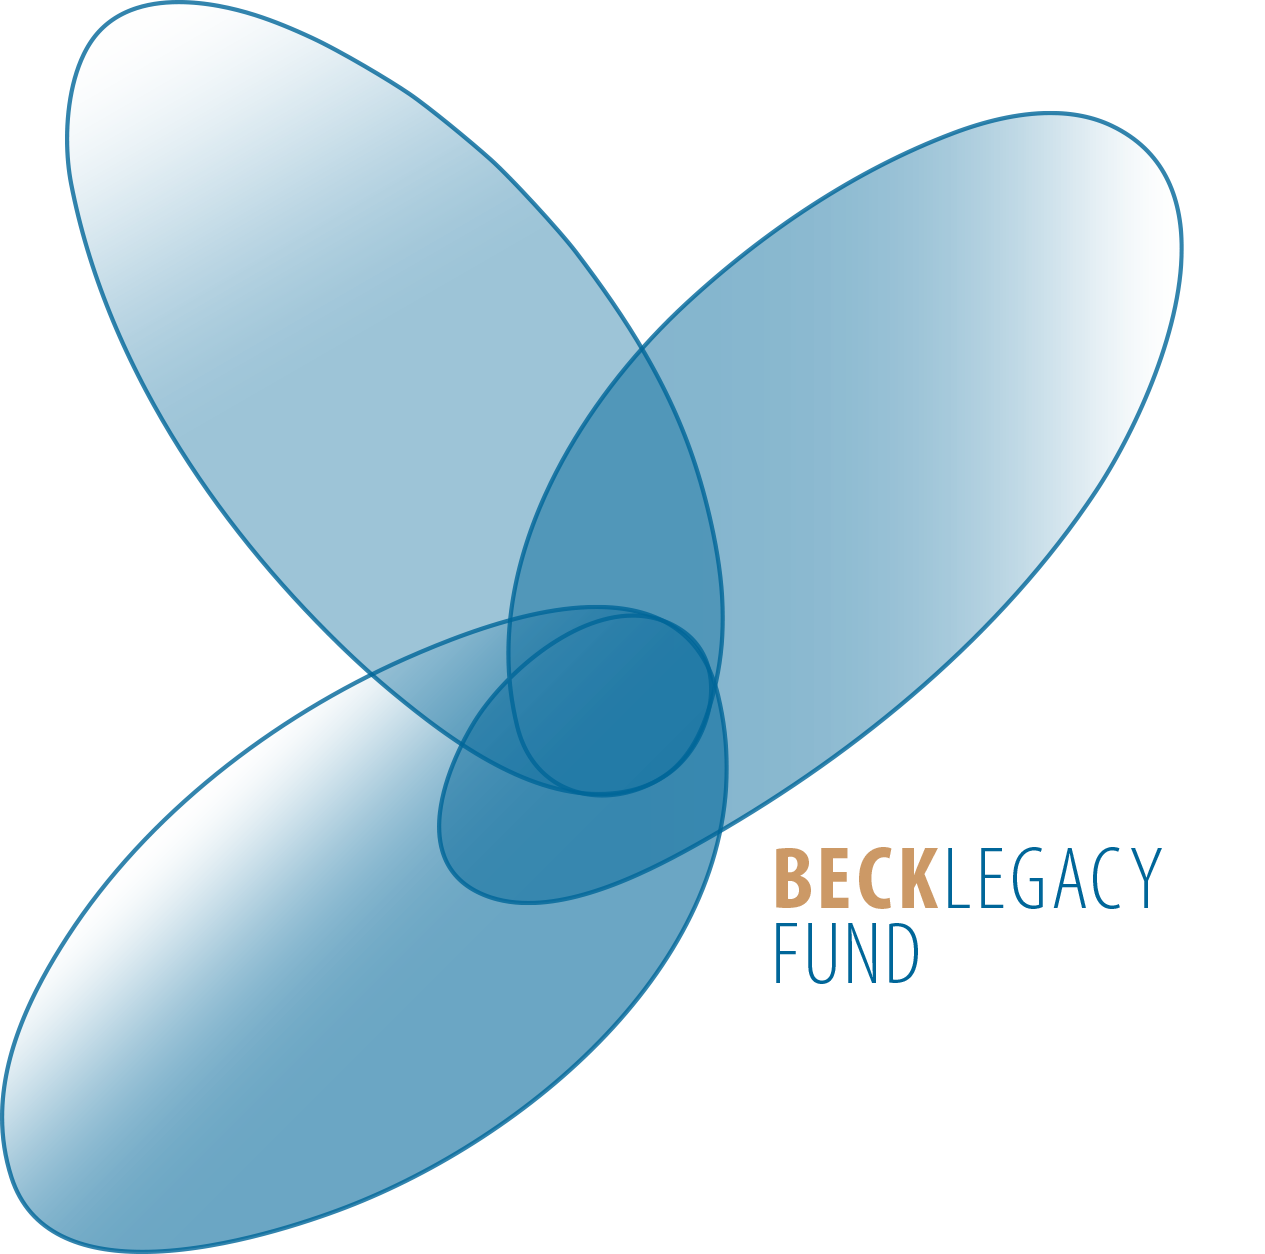 The Beck Legacy Fund